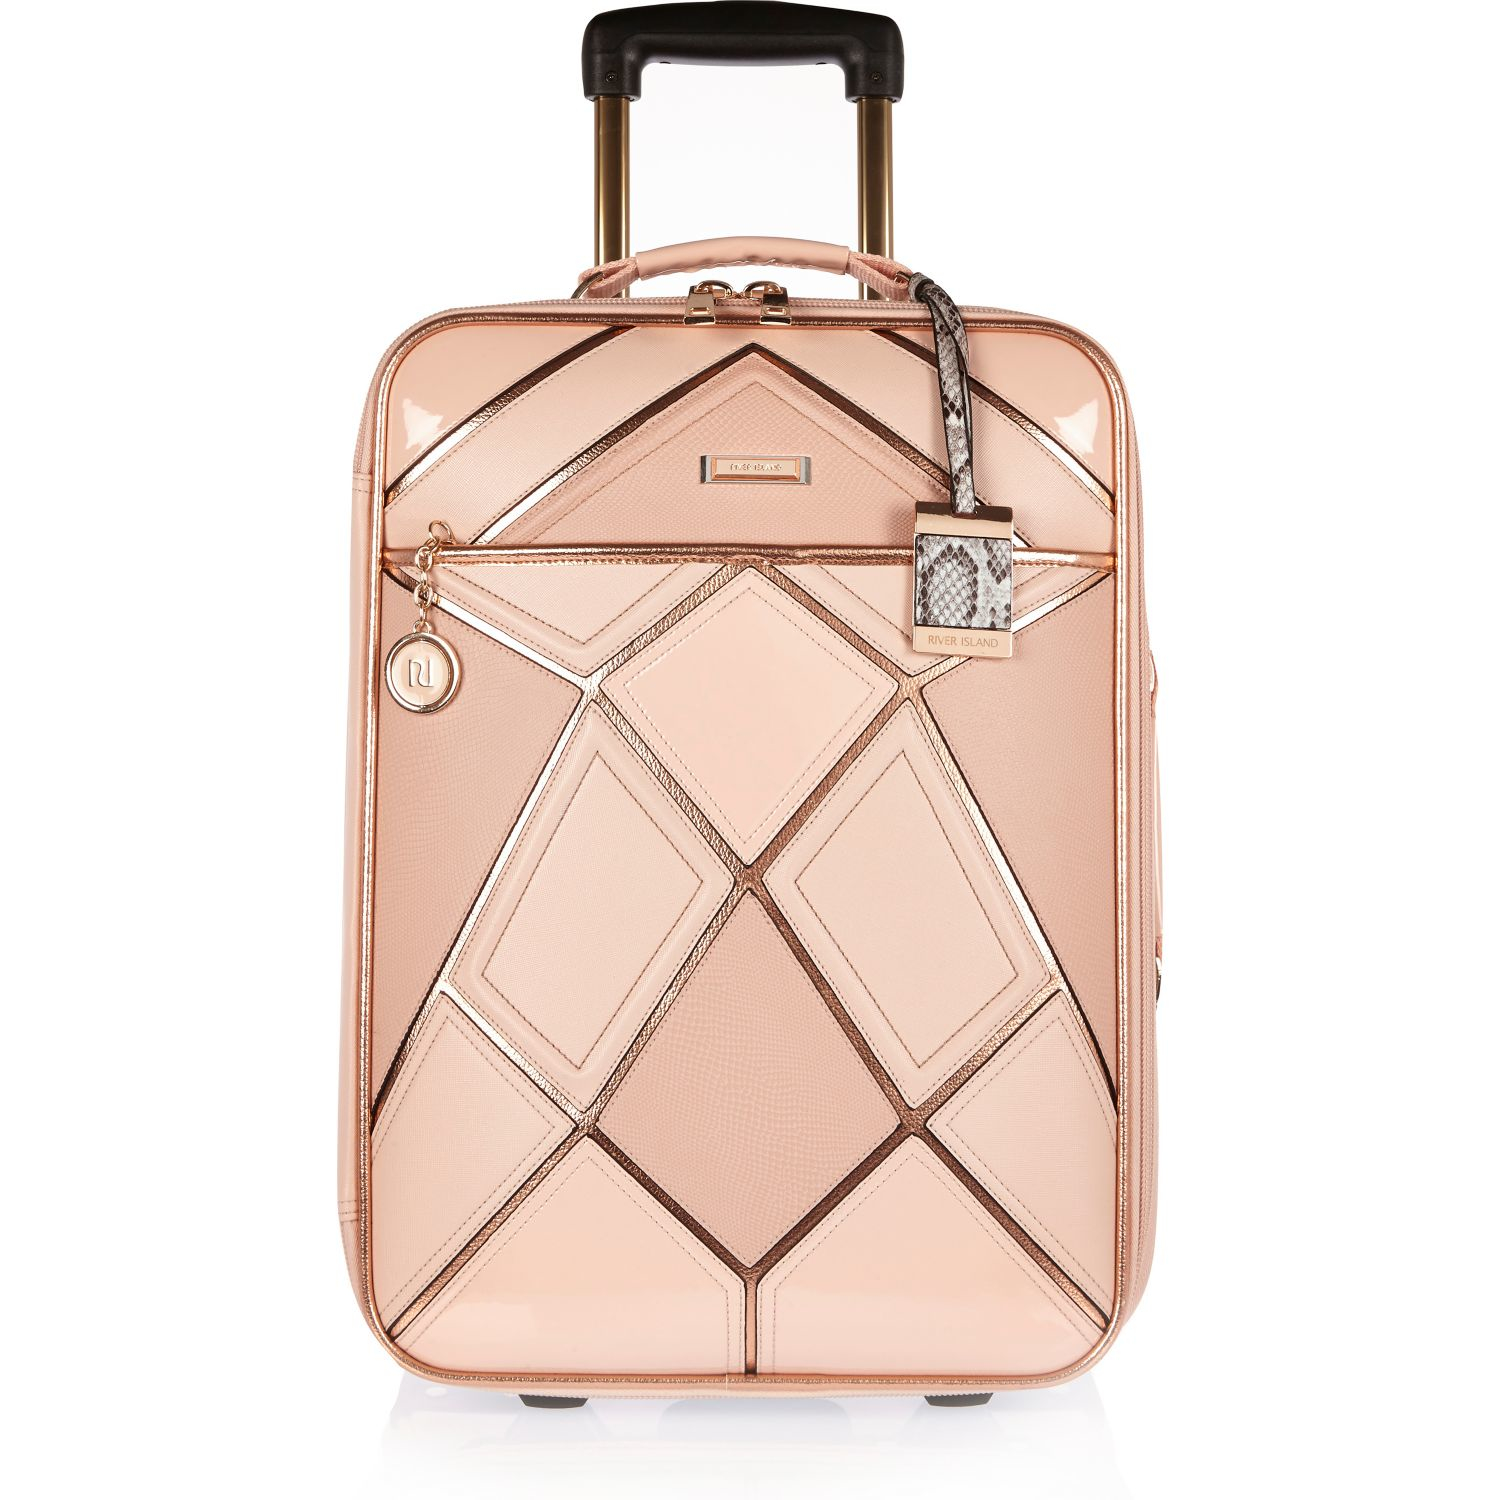 River Island Pink Patchwork Suitcase in Pink - Lyst